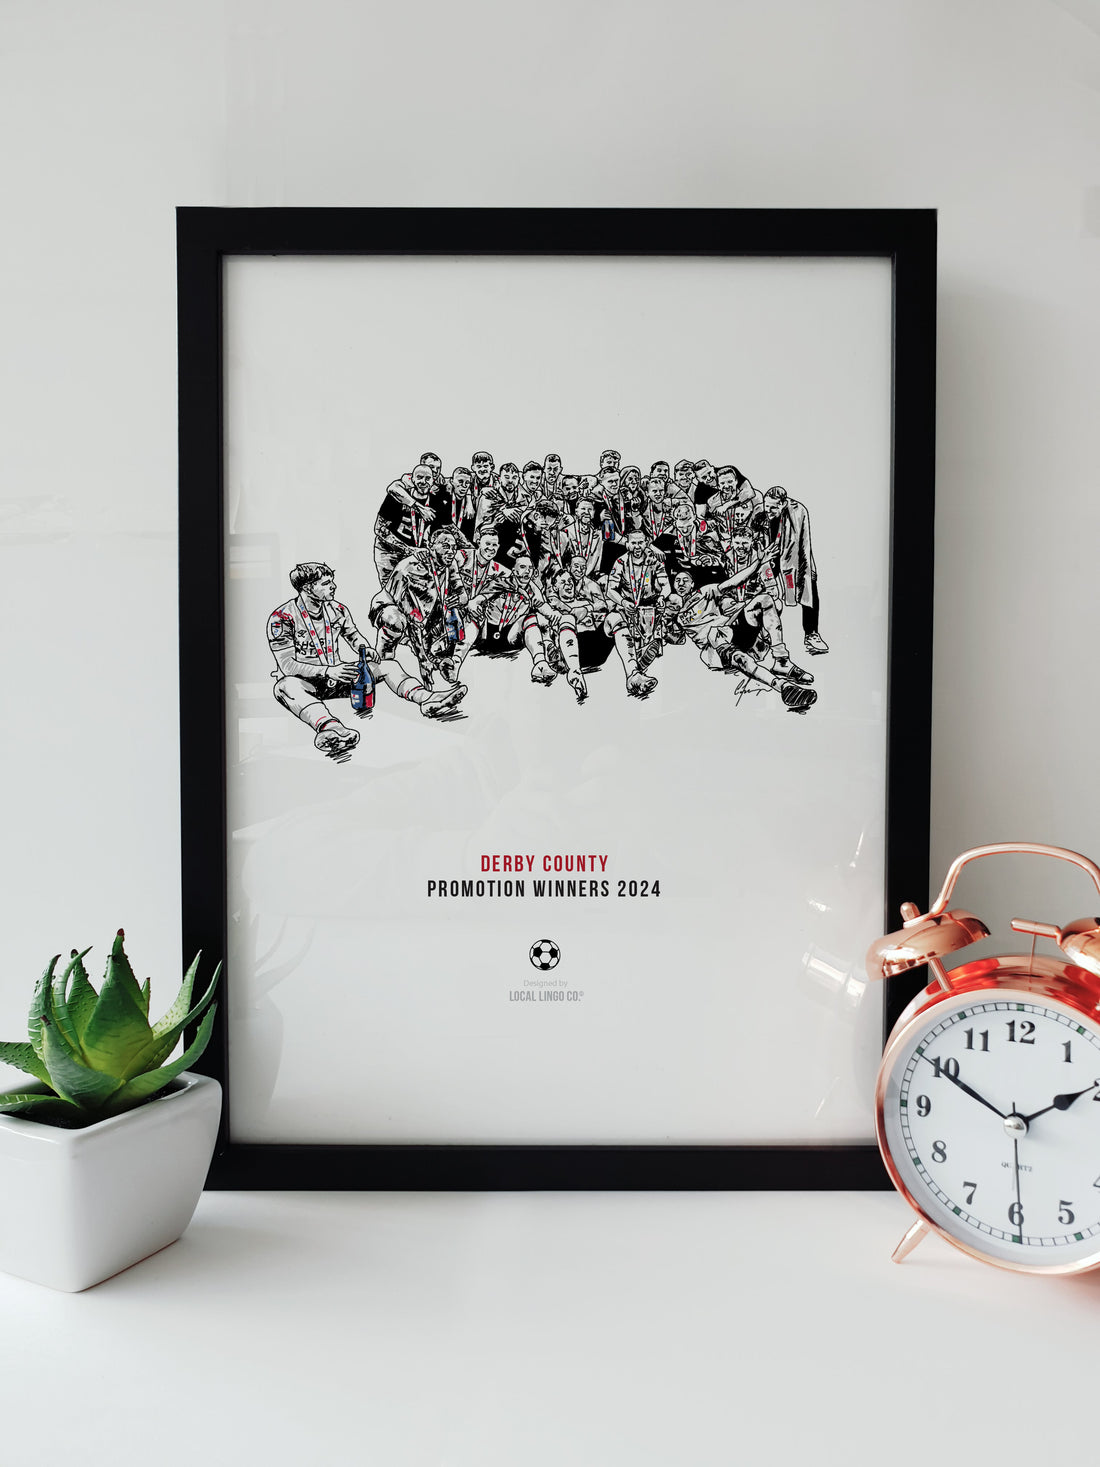 Black and white print of Derby County's football team celebrating their 2024 promotion, with players joyously gathered in a group on the field. designed by local lingo